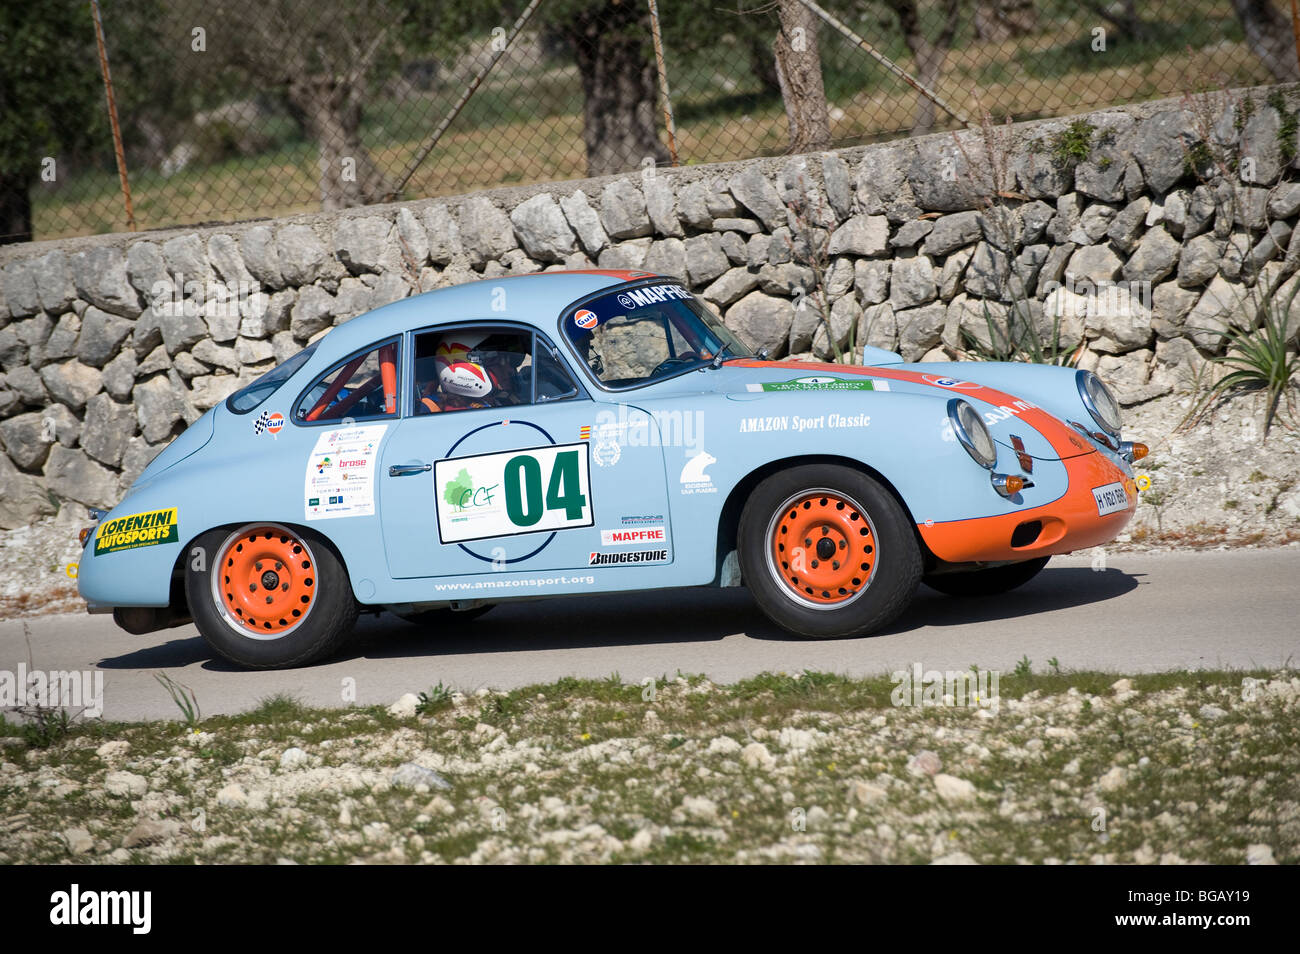 Porsche 356 Blue High Resolution Stock Photography and Images - Alamy